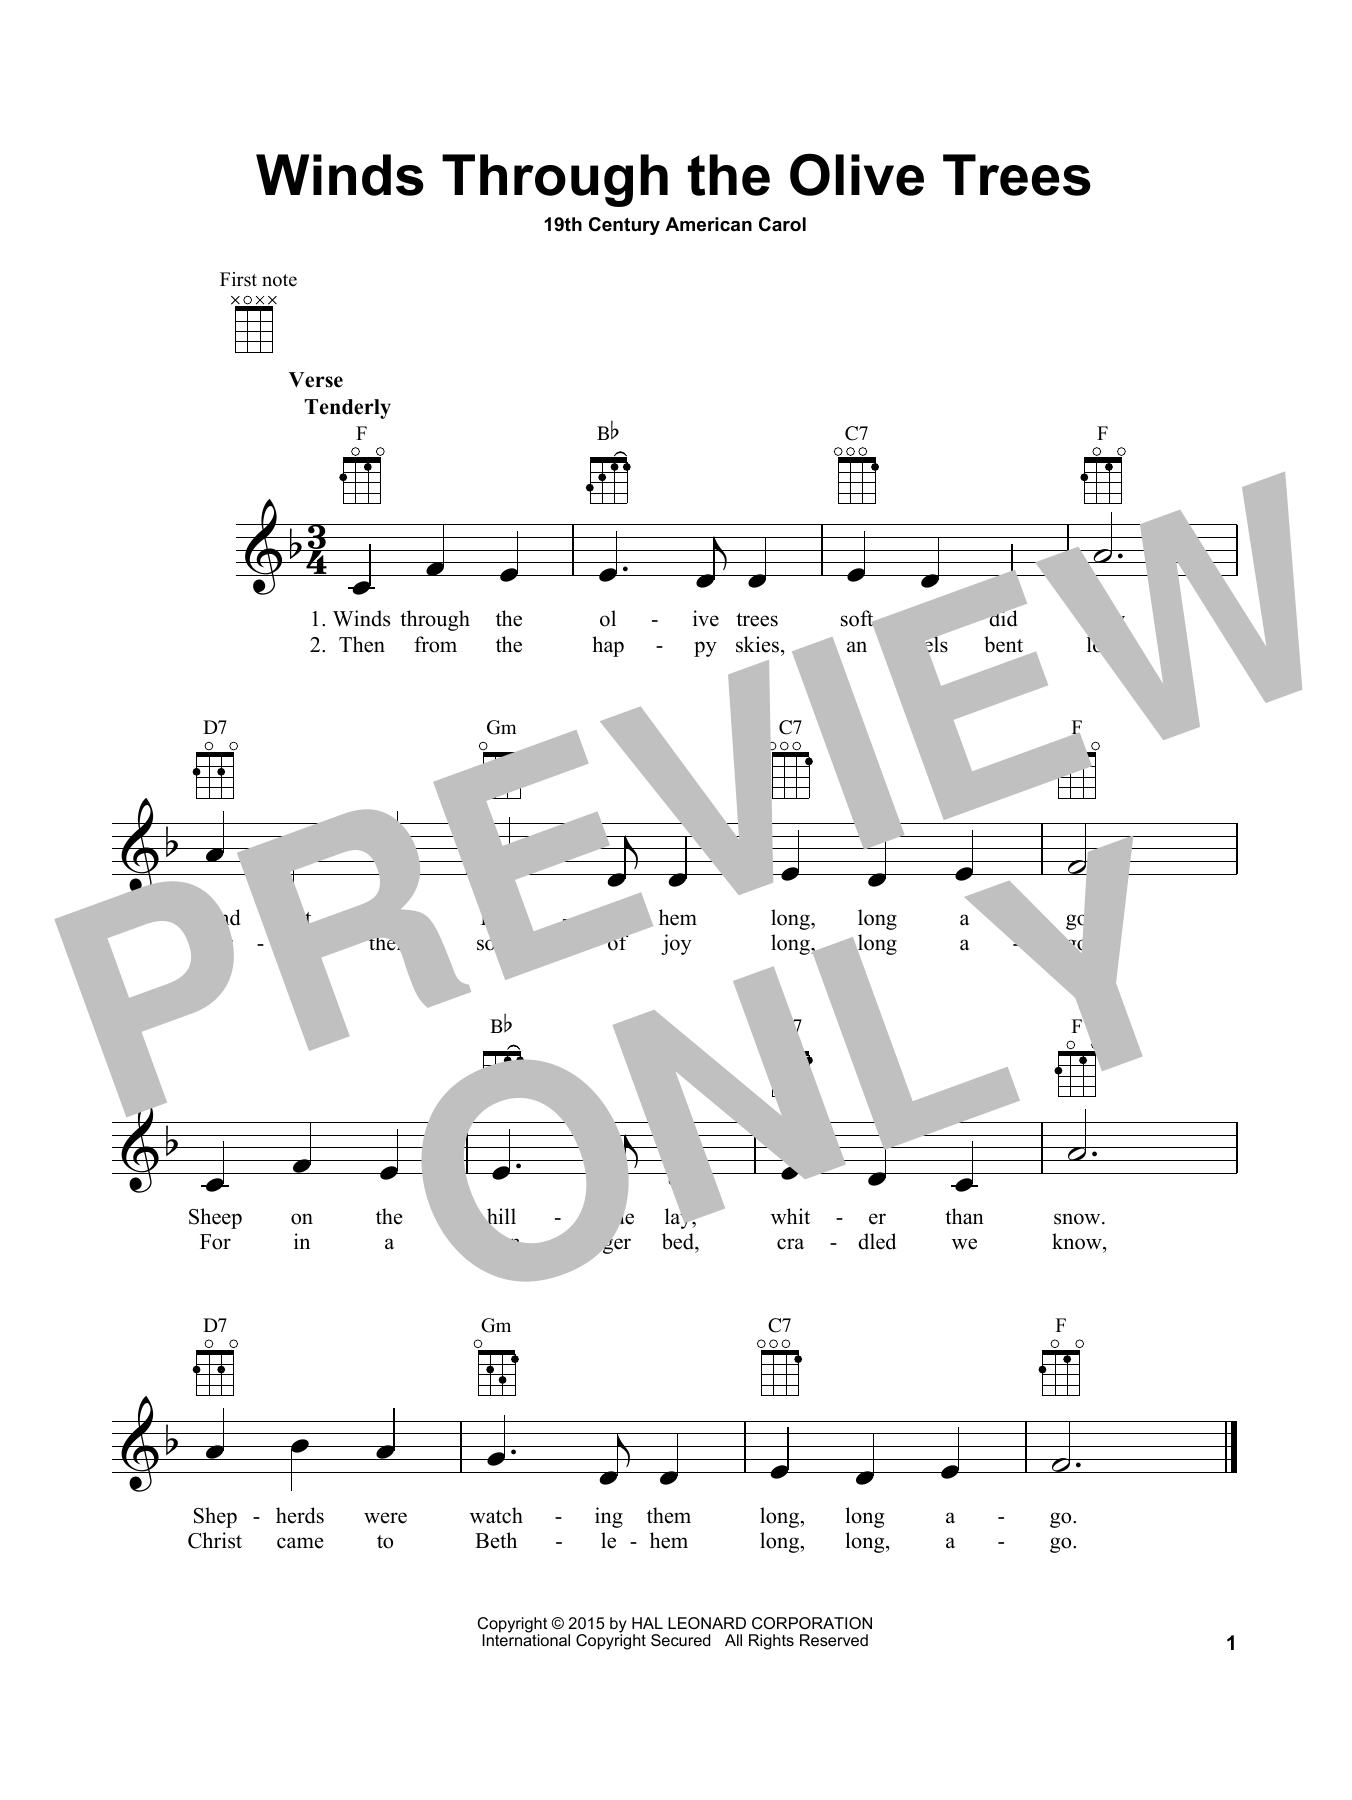 Download 19th Century American Carol Winds Through The Olive Trees Sheet Music